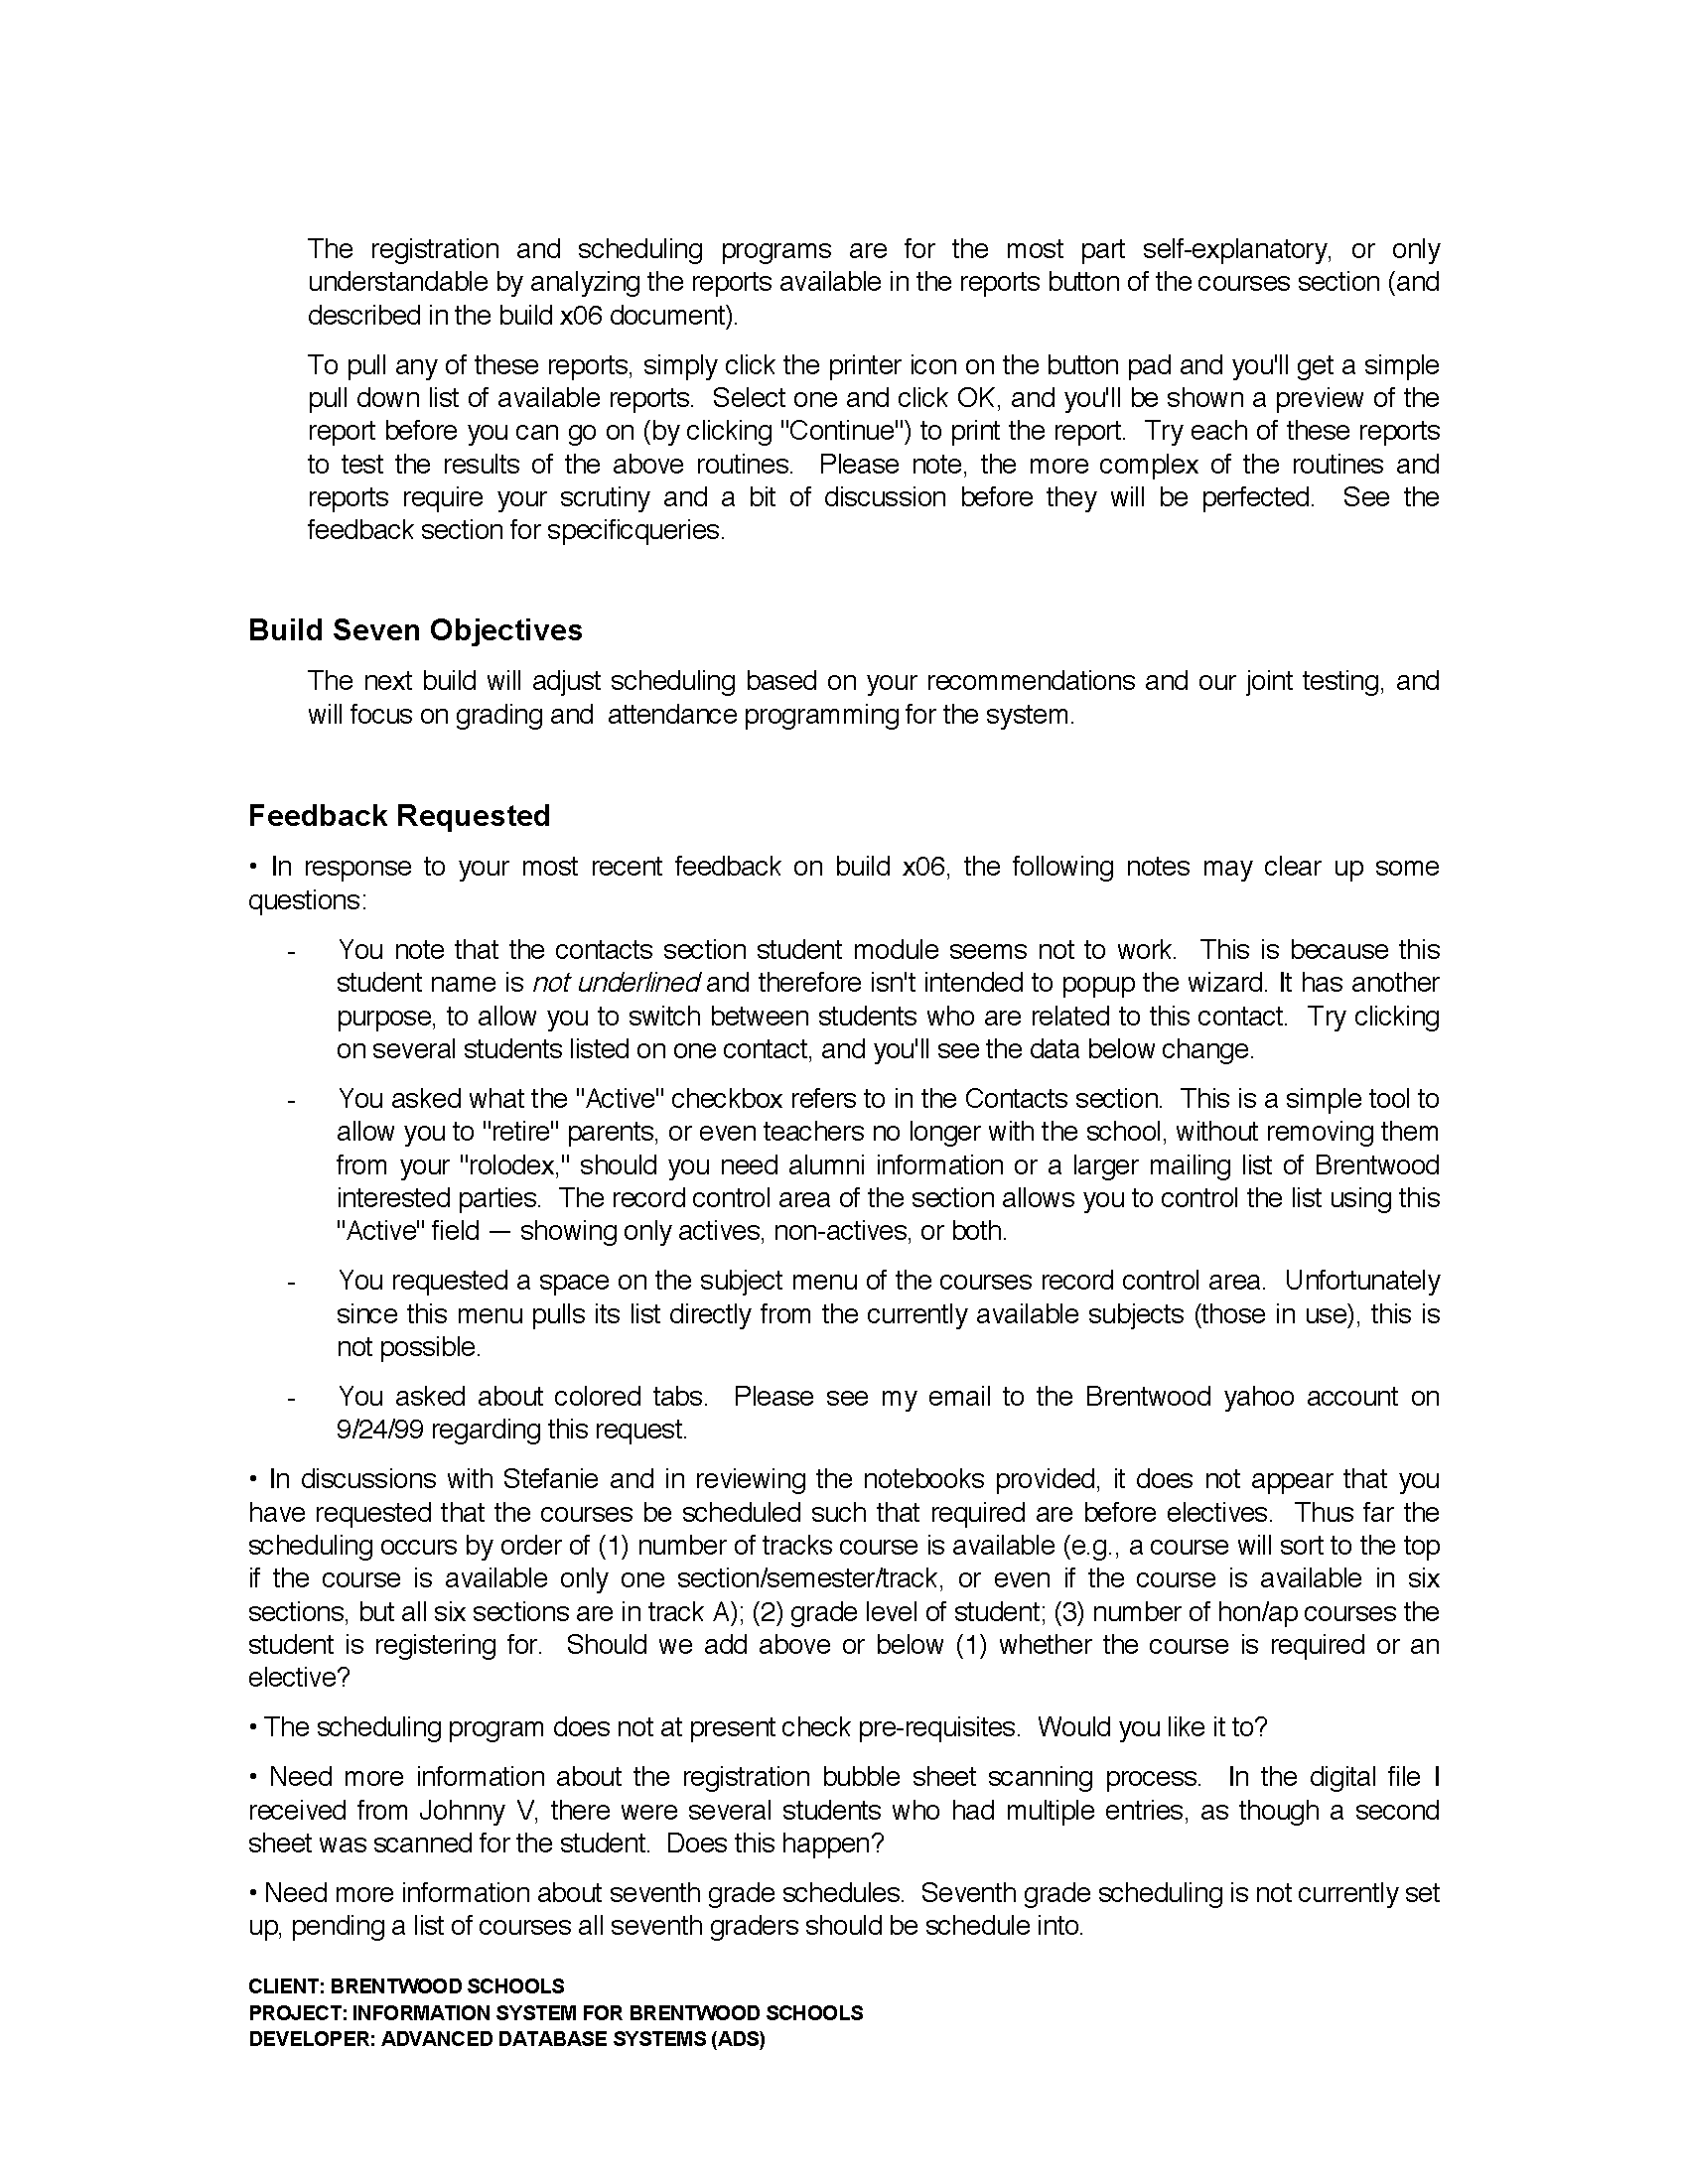 Project Summary (Page 2)